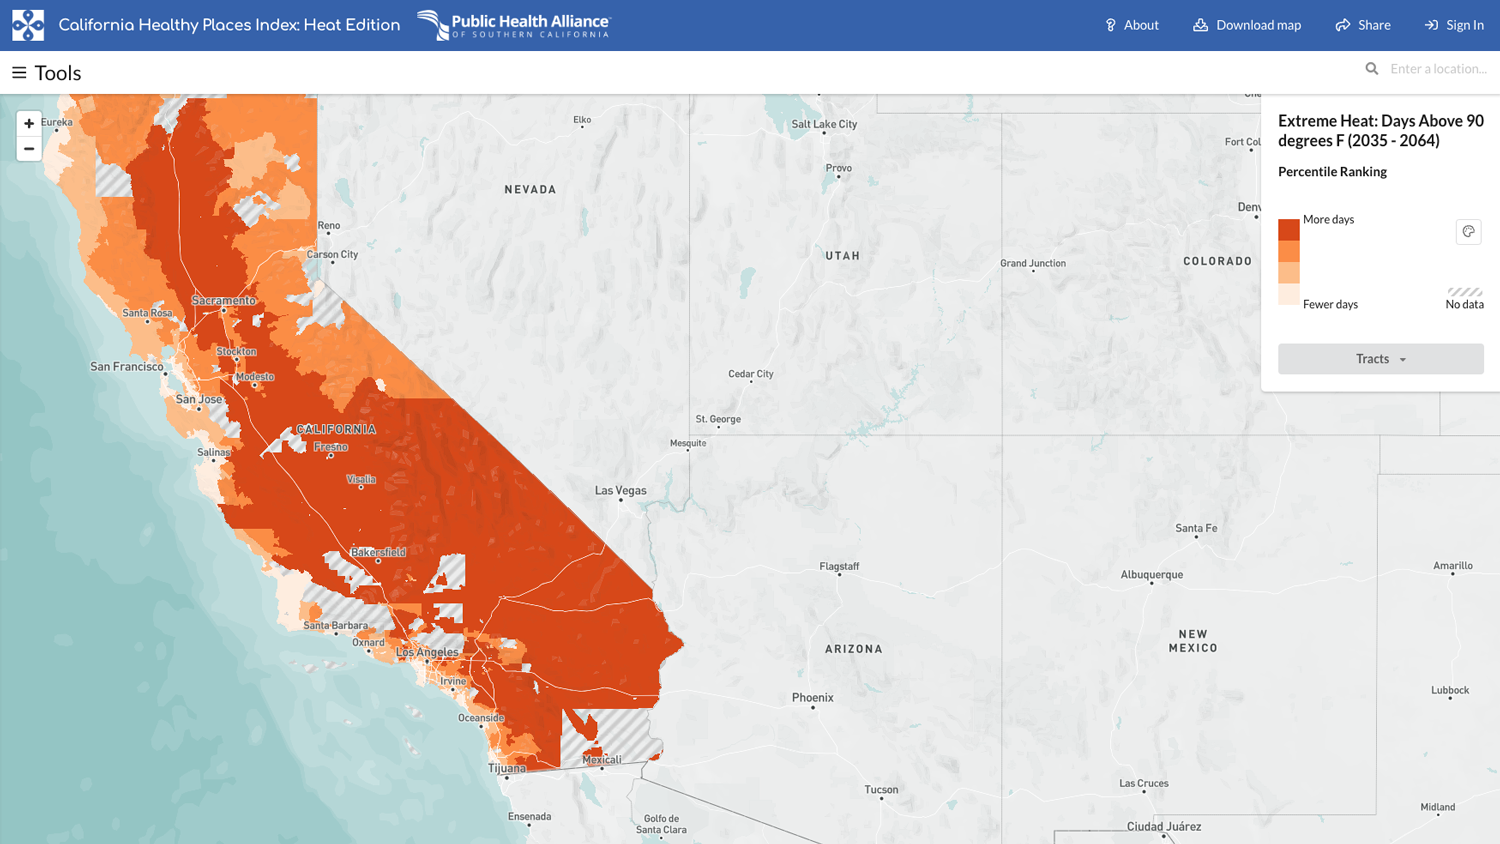 image shows a map of California color-coded by days of extreme heat